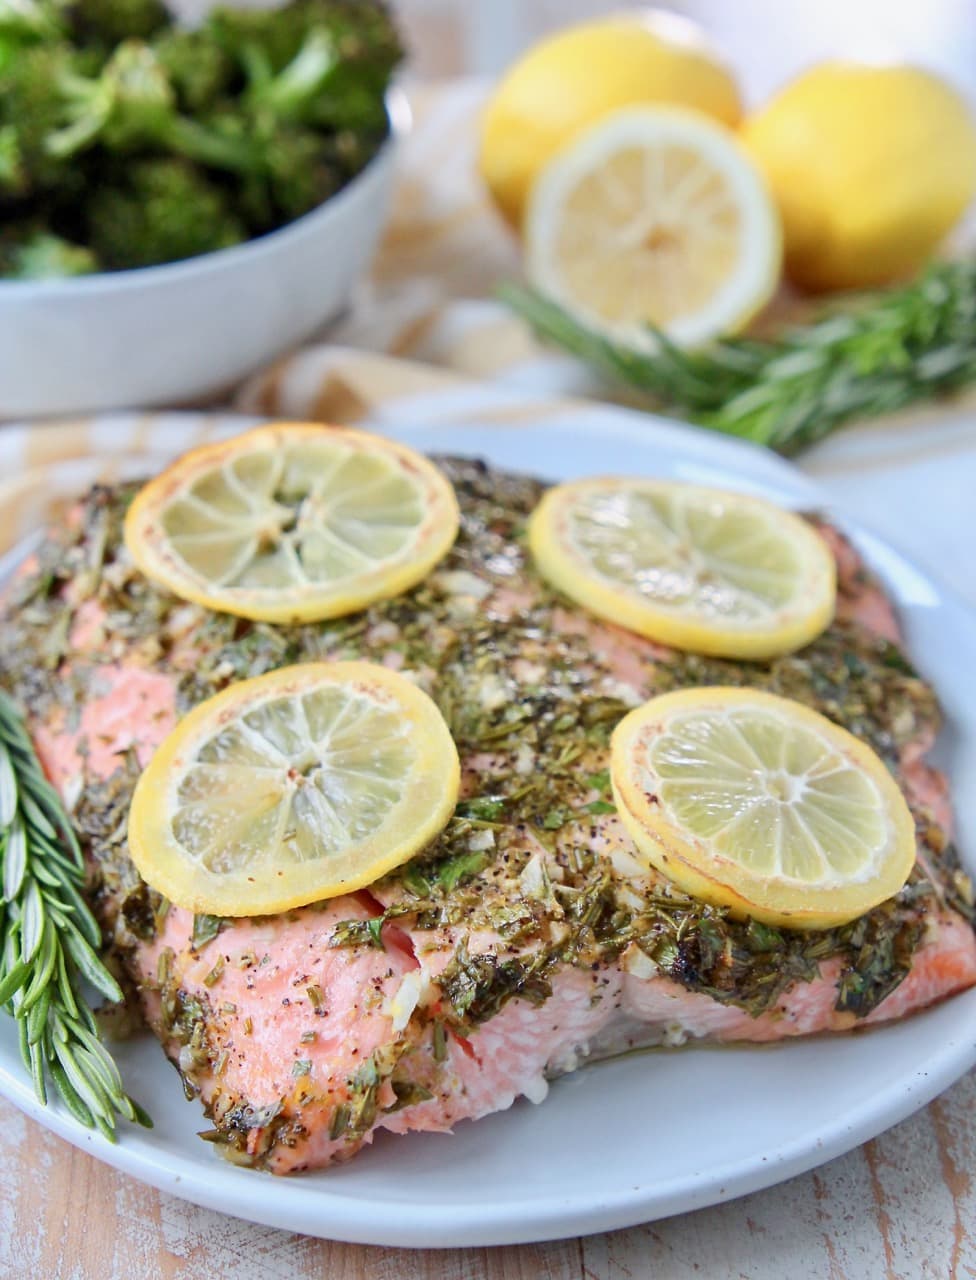 Piece of baked salmon on plate, topped with herbs and lemon slices